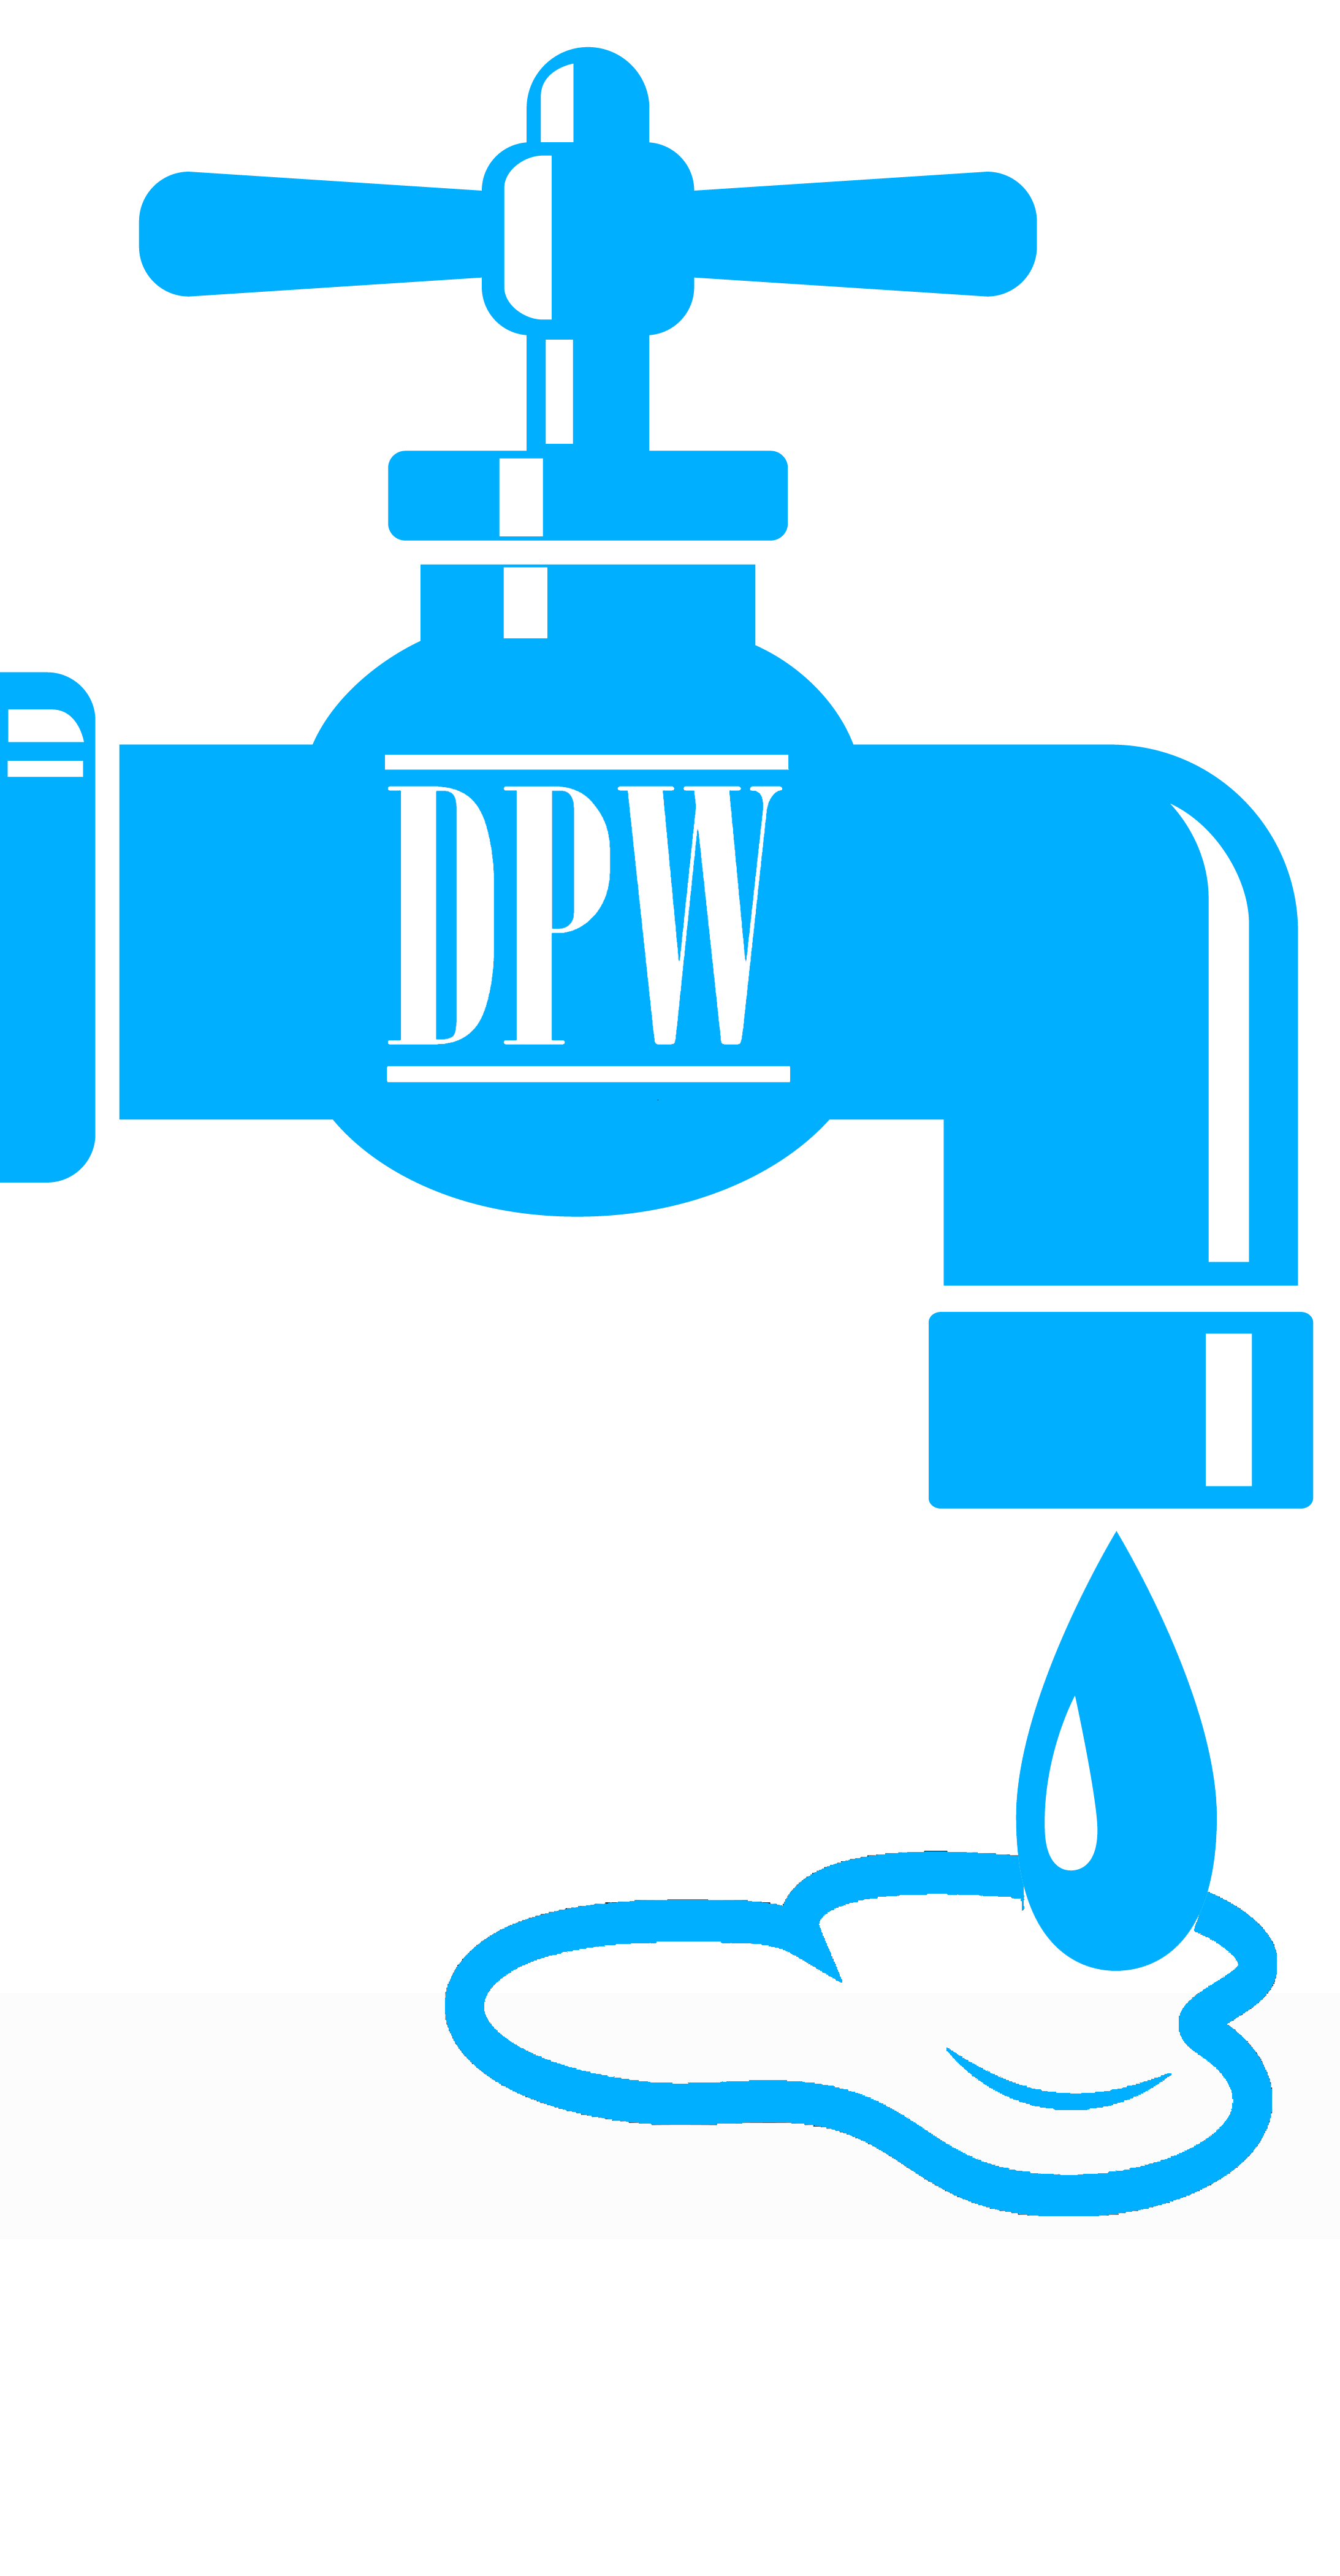 Picture of a blue spigot with 'DPW' text